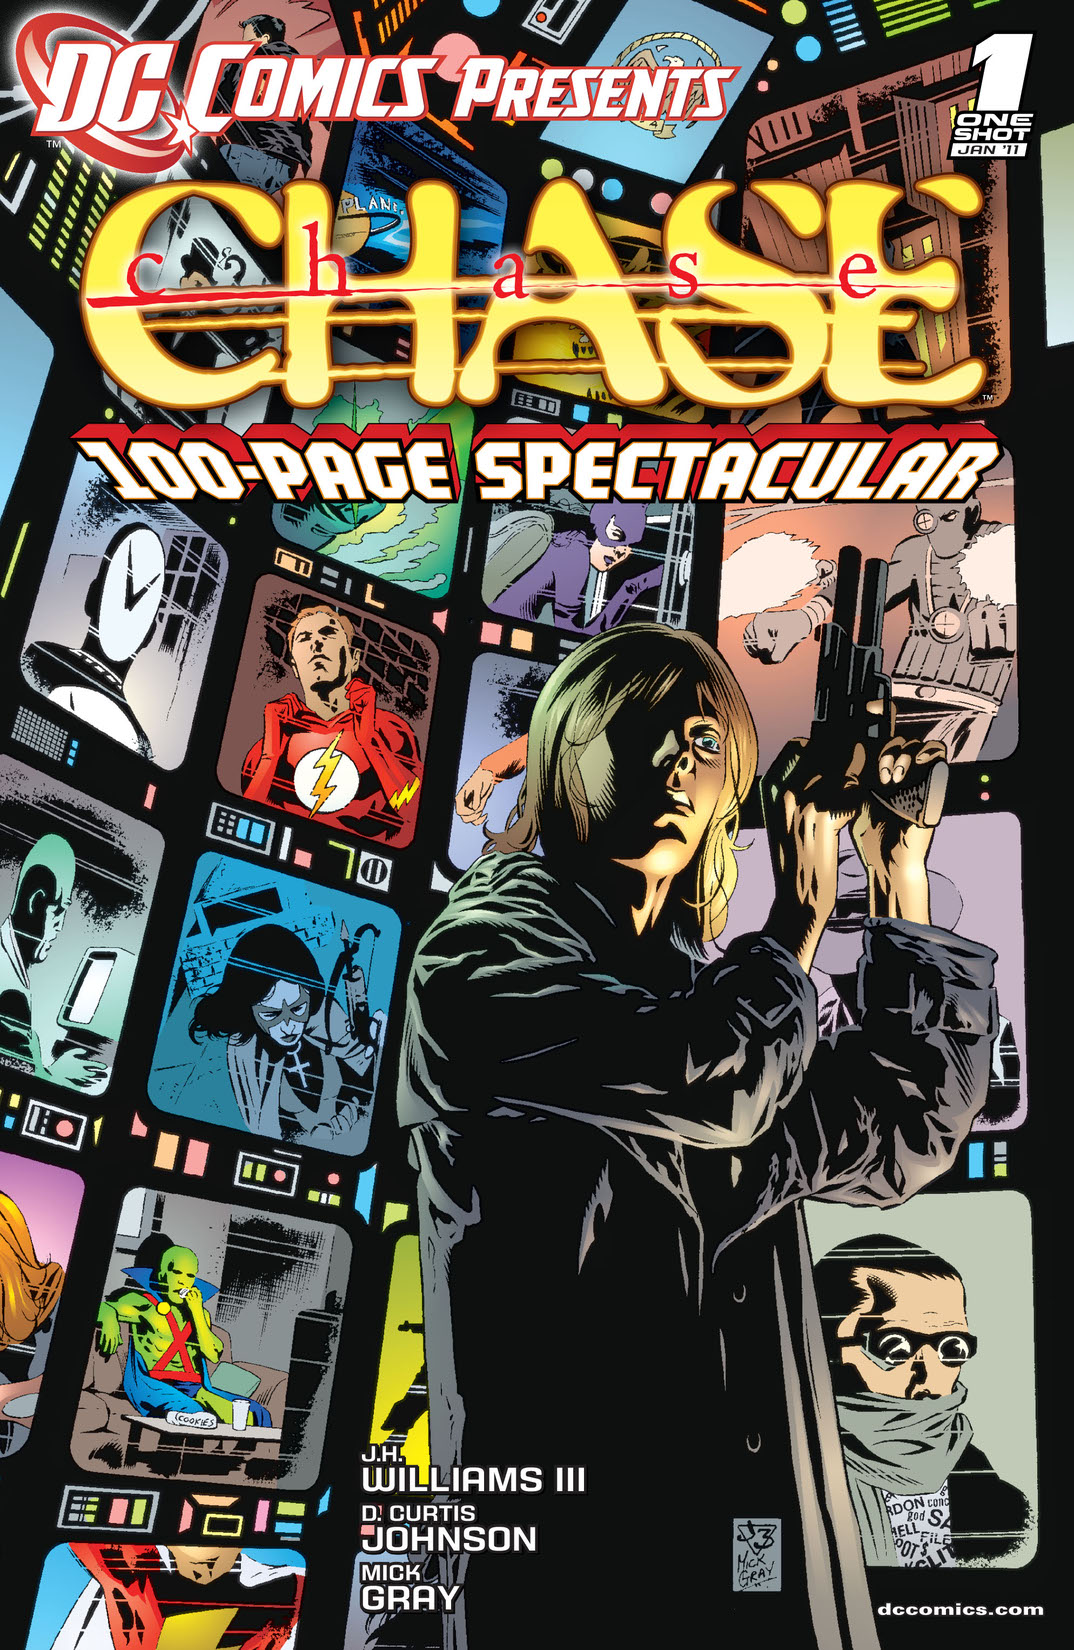 DC Comics Presents: Chase (2010-) #1 preview images